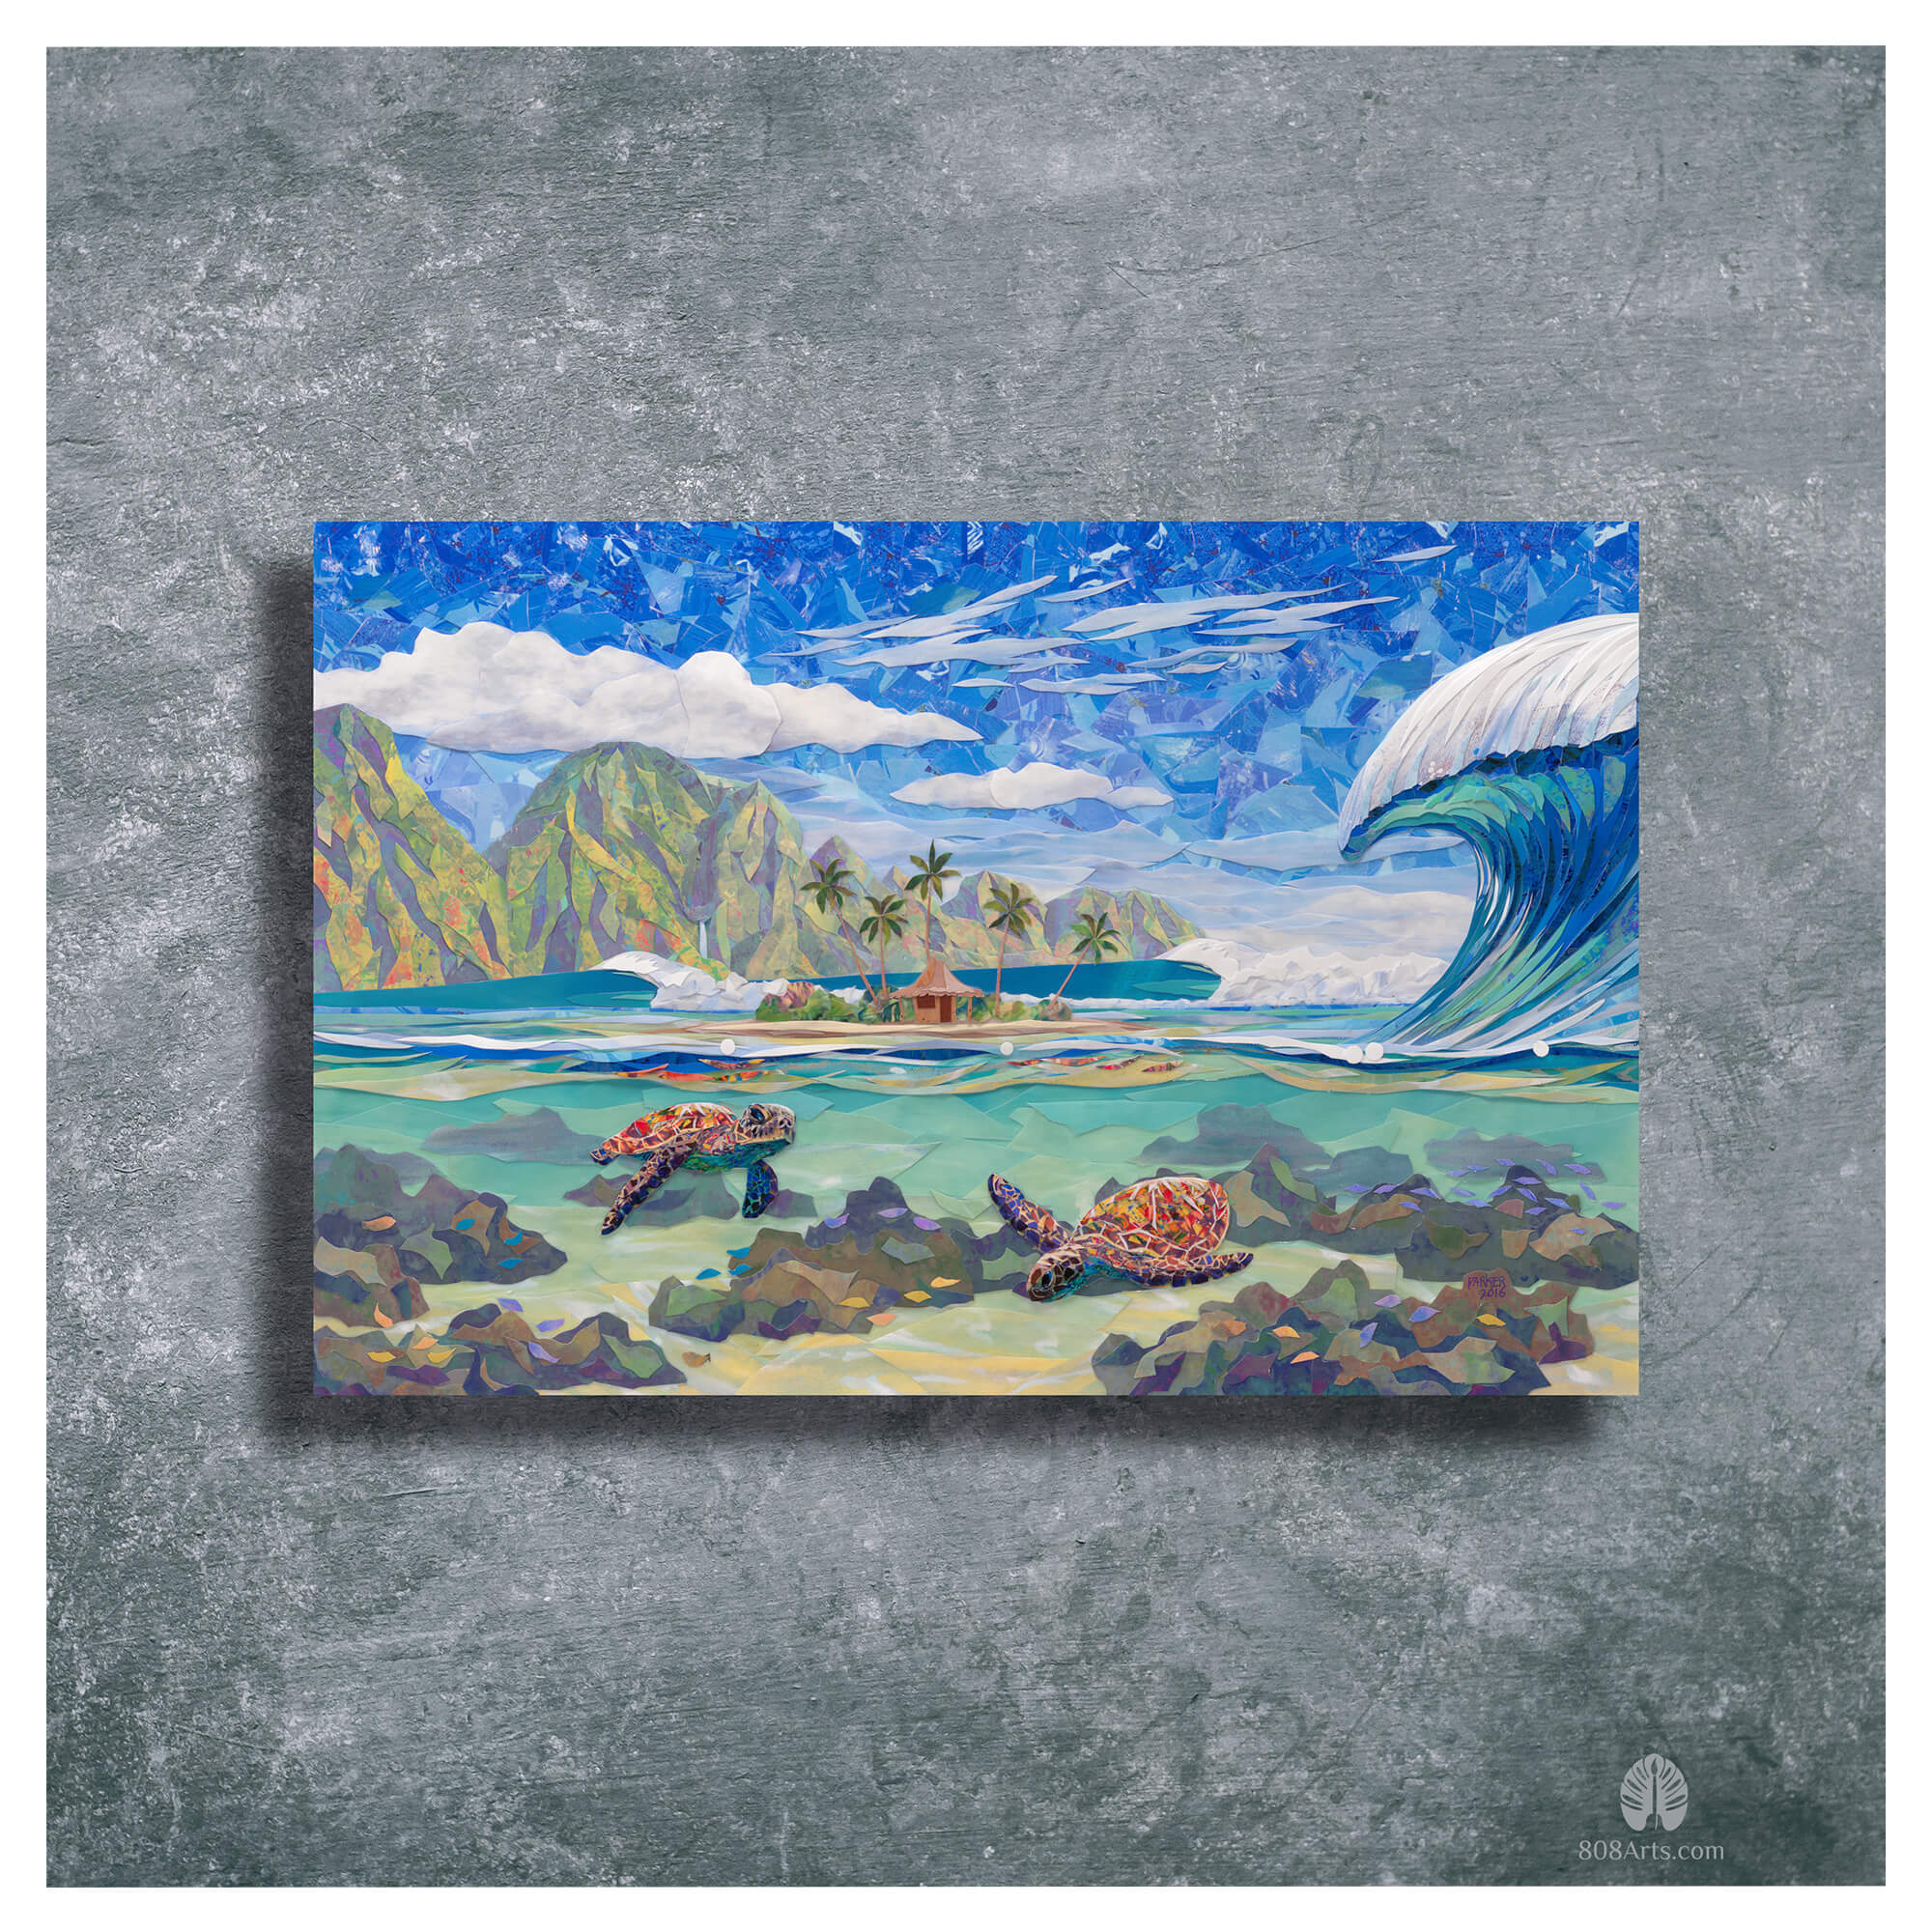 A metal art print featuring a collage of a tranquil seascape with two swimming sea turtles a hut on an island, a huge crashing wave, and a mountain background, by Maui artist Patrick Parker